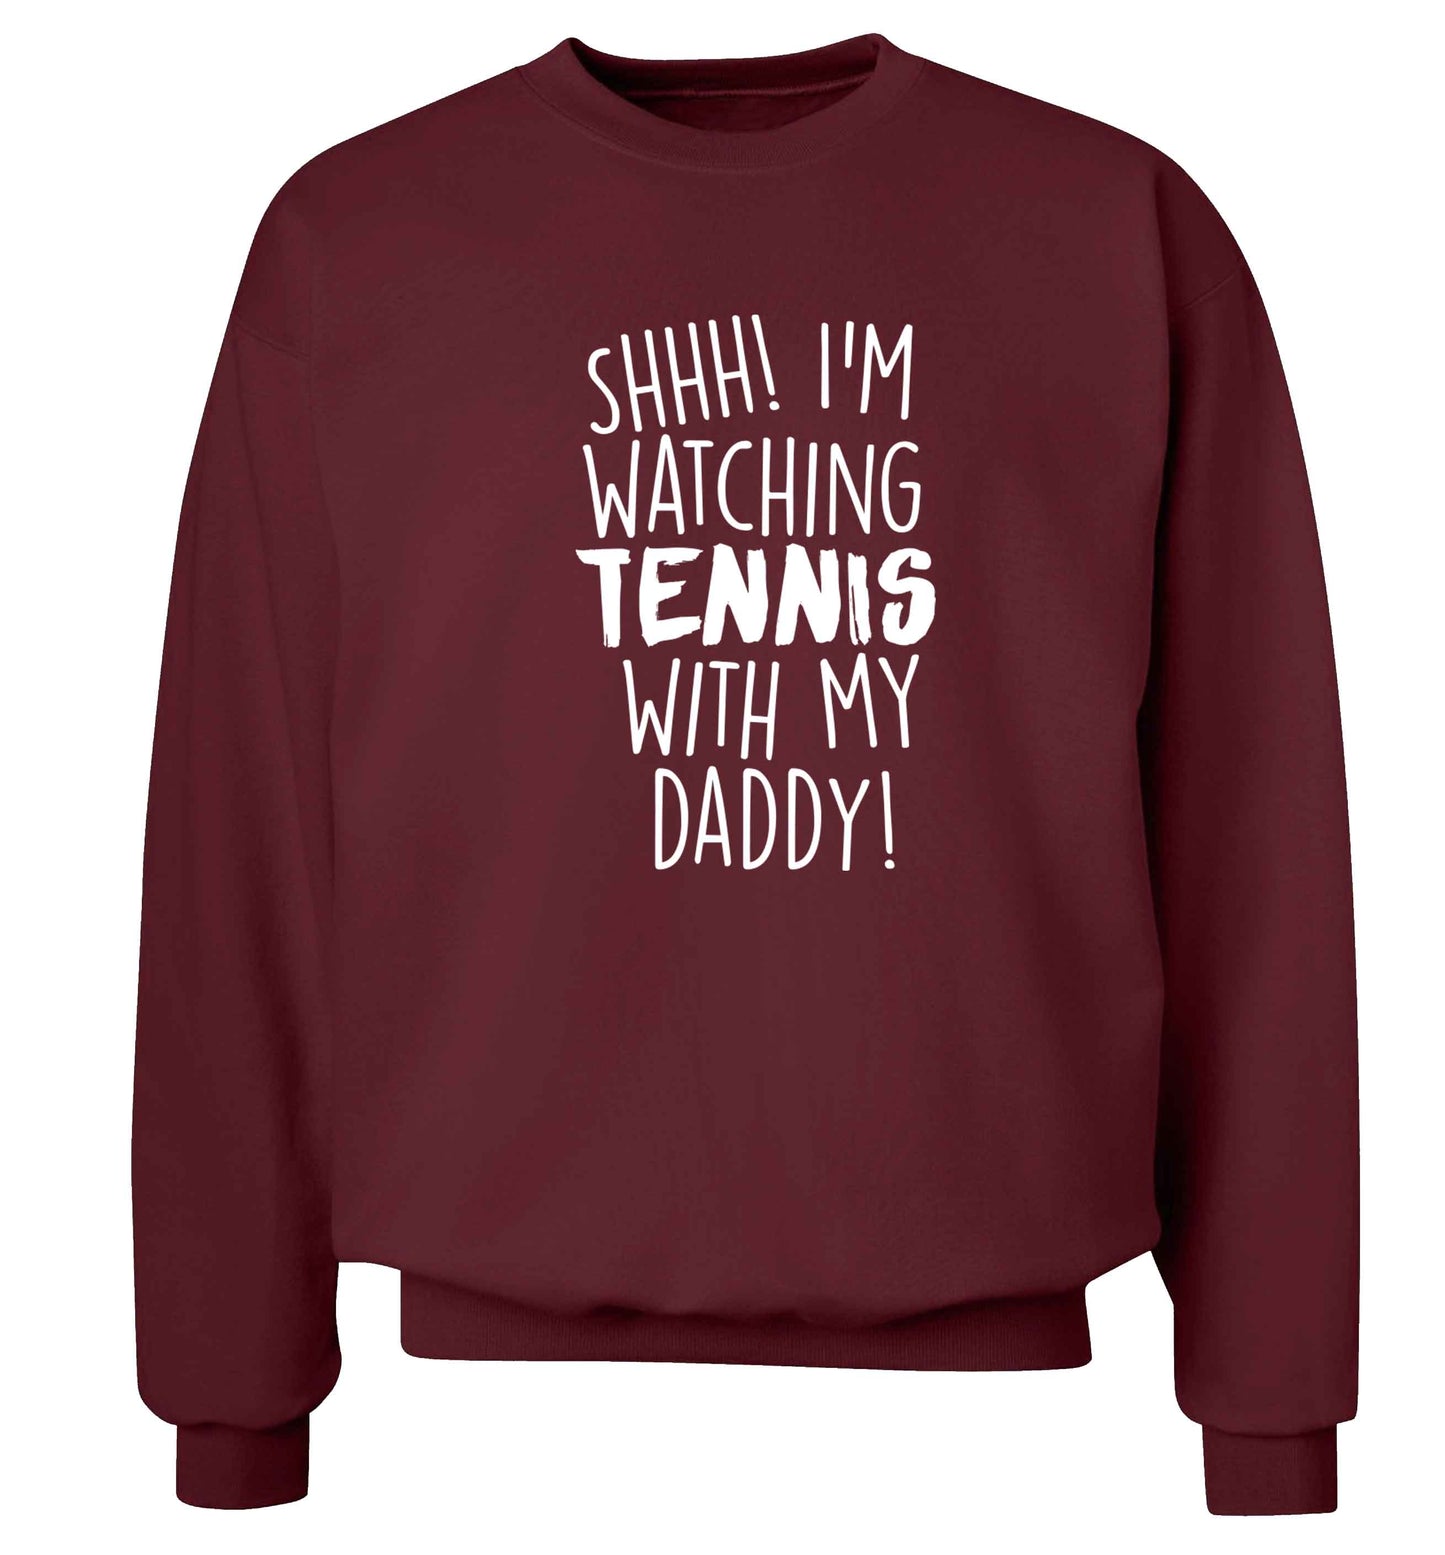 Shh! I'm watching tennis with my daddy! Adult's unisex maroon Sweater 2XL